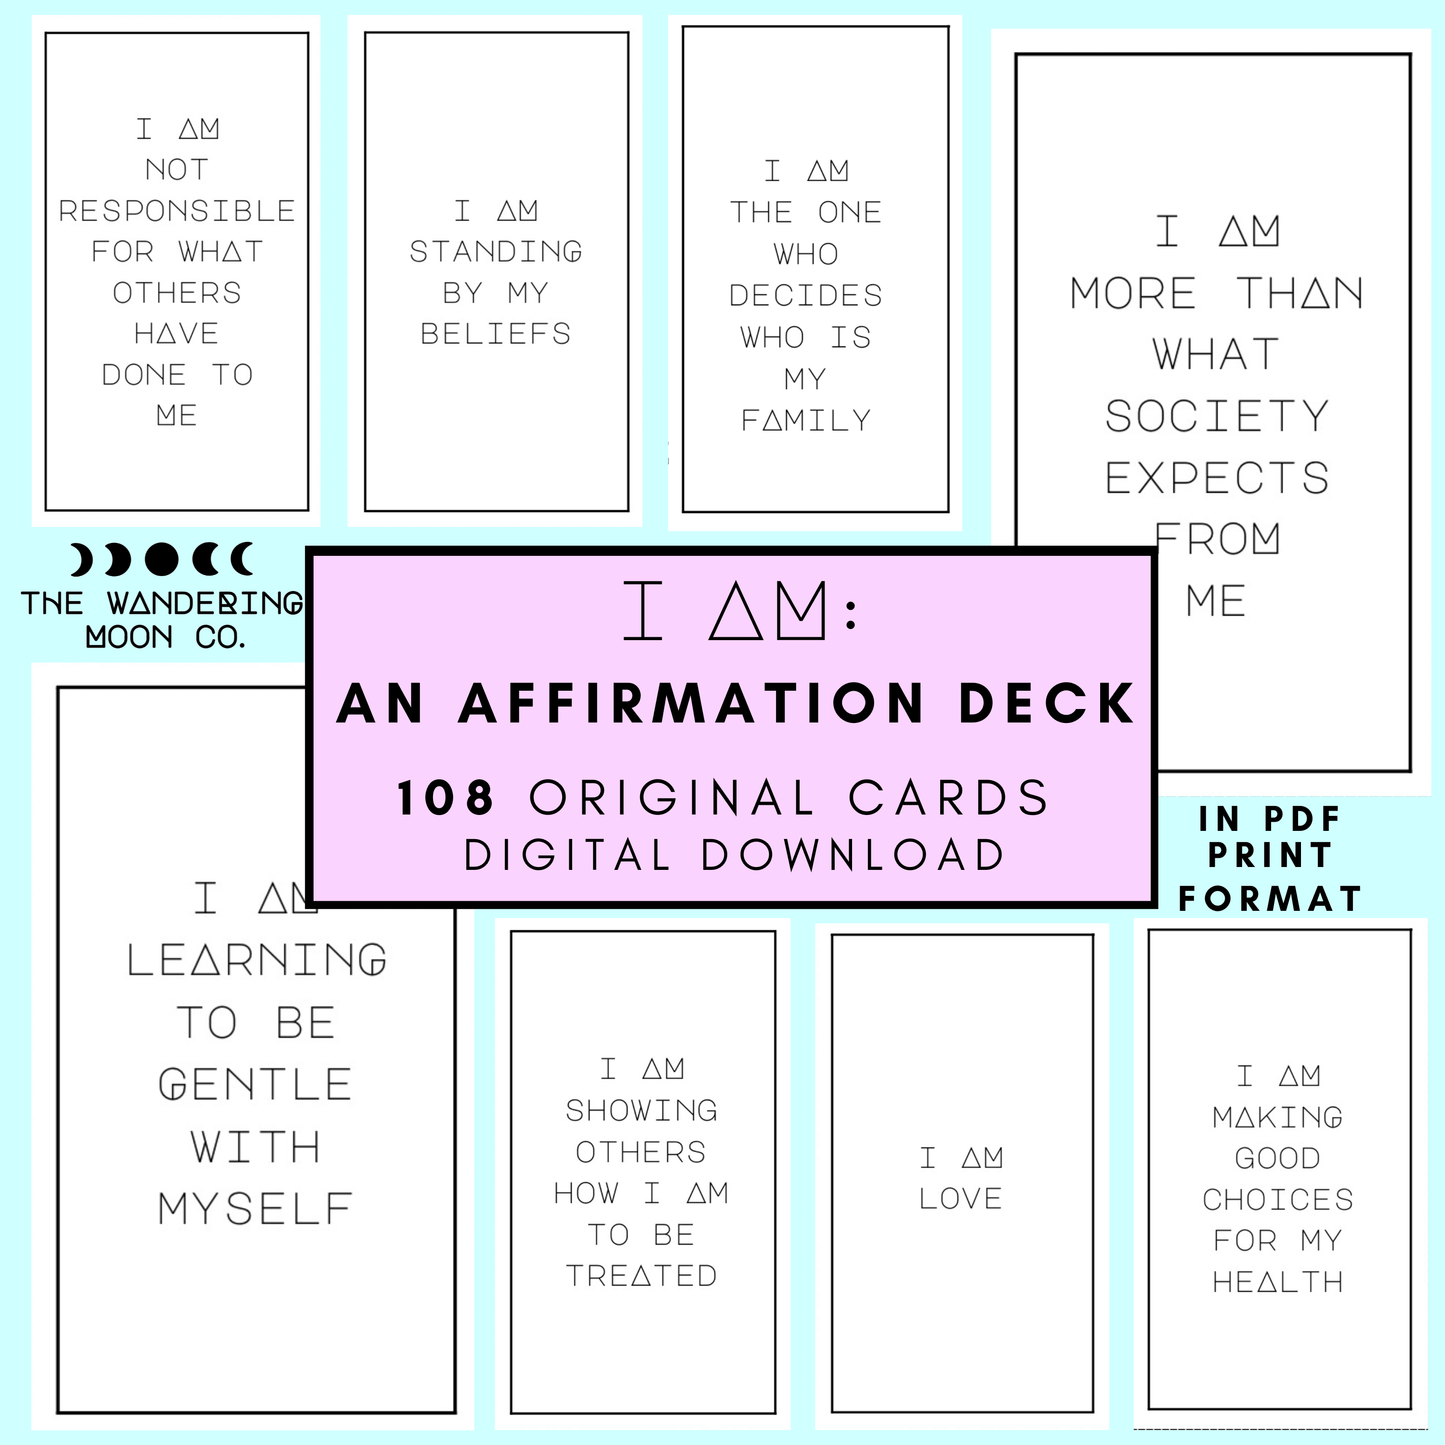 i am: a digital affirmation deck 108 cards - The Wandering Moon Co.